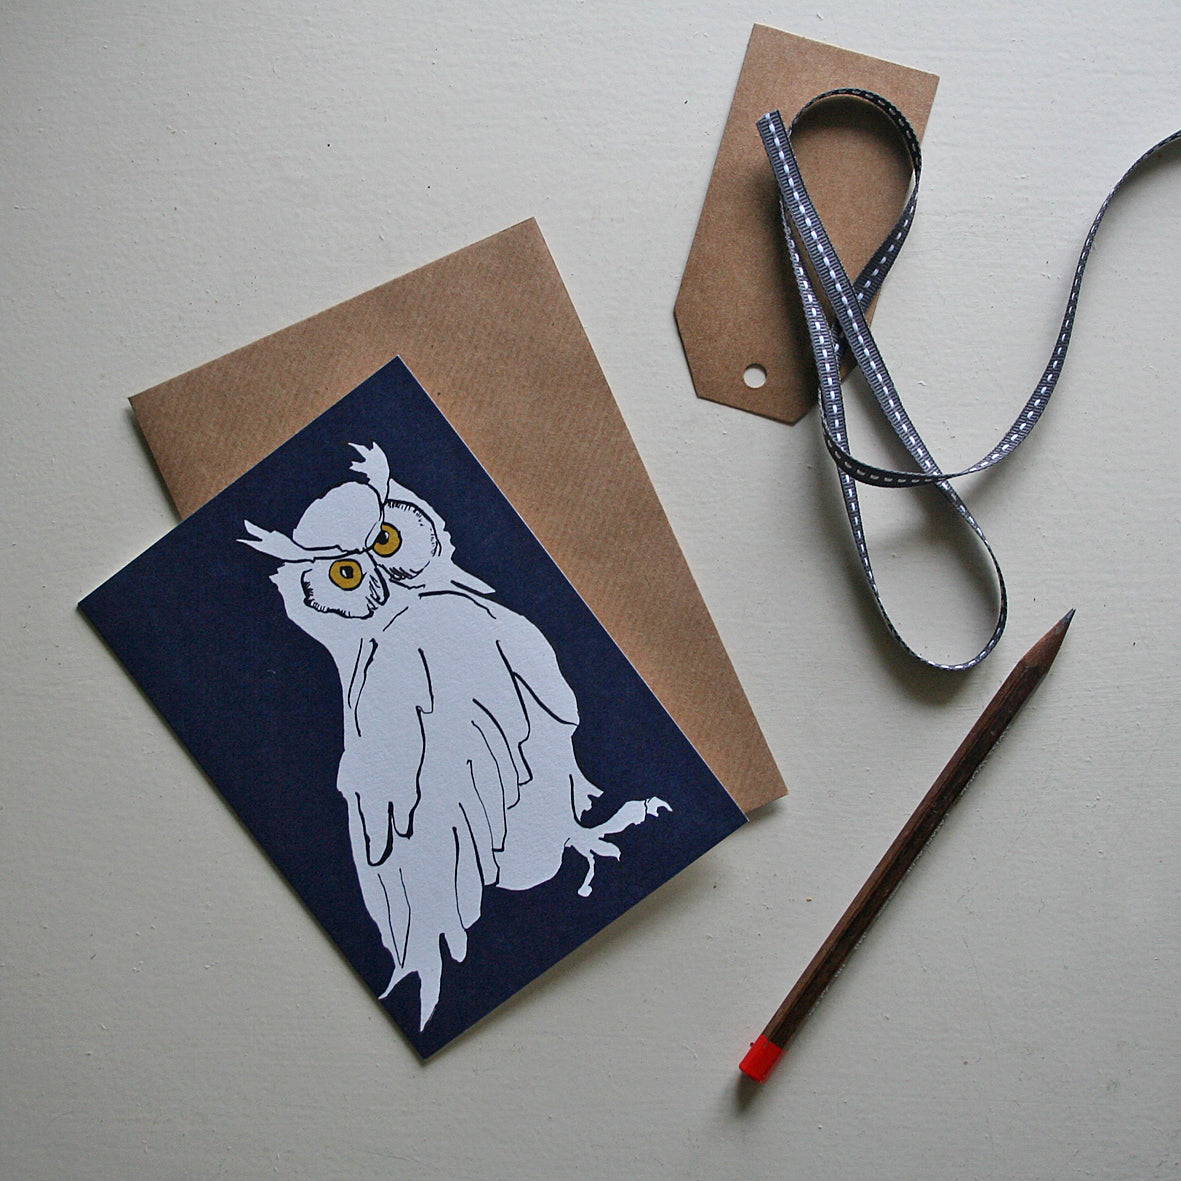 Owl card with midnight background